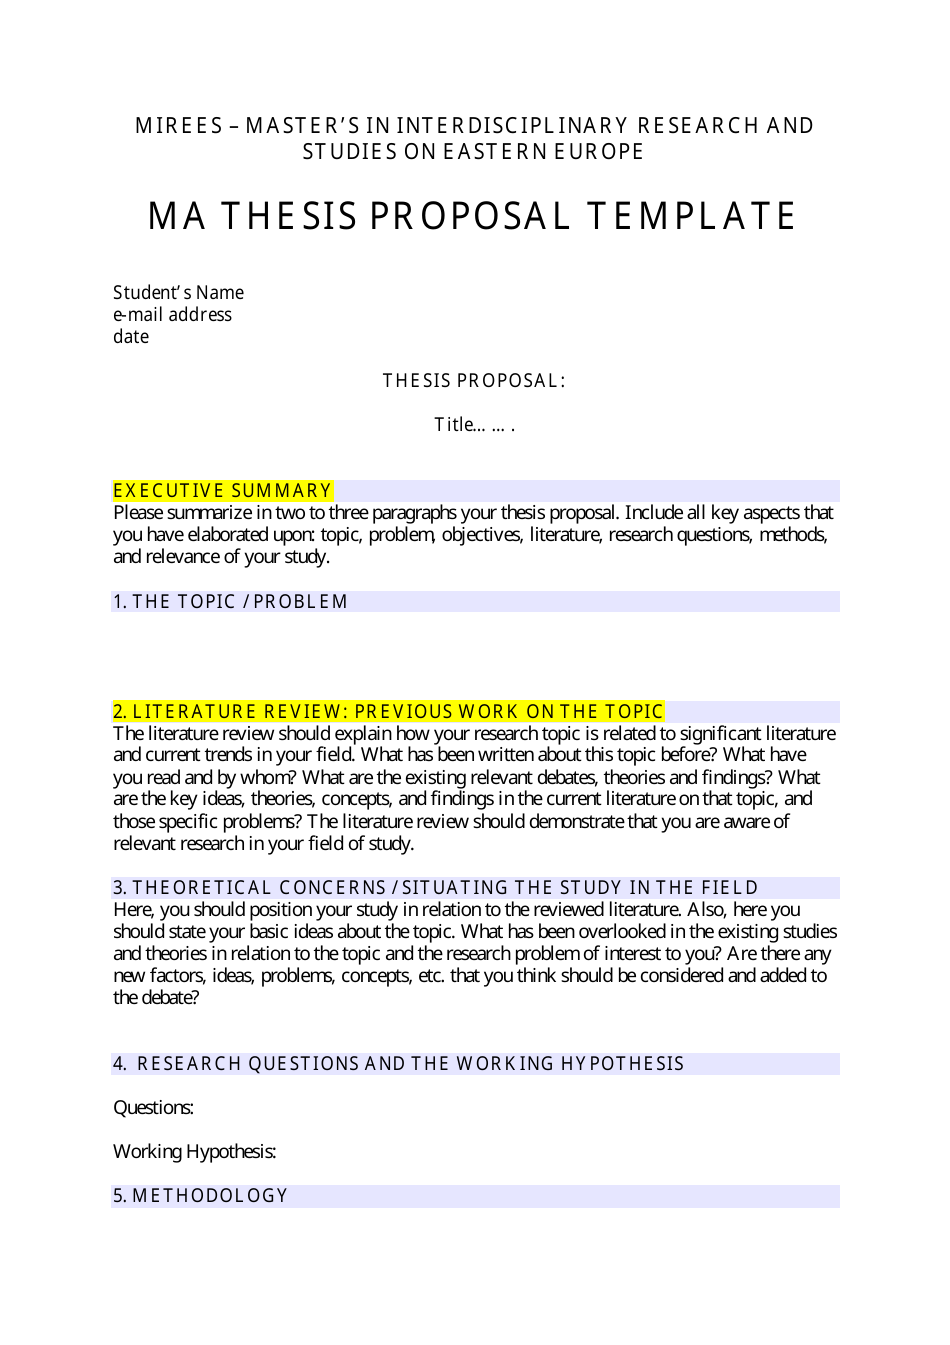 Ma Thesis Proposal Template - Interdisciplinary Research and Inside Research Project Proposal Template